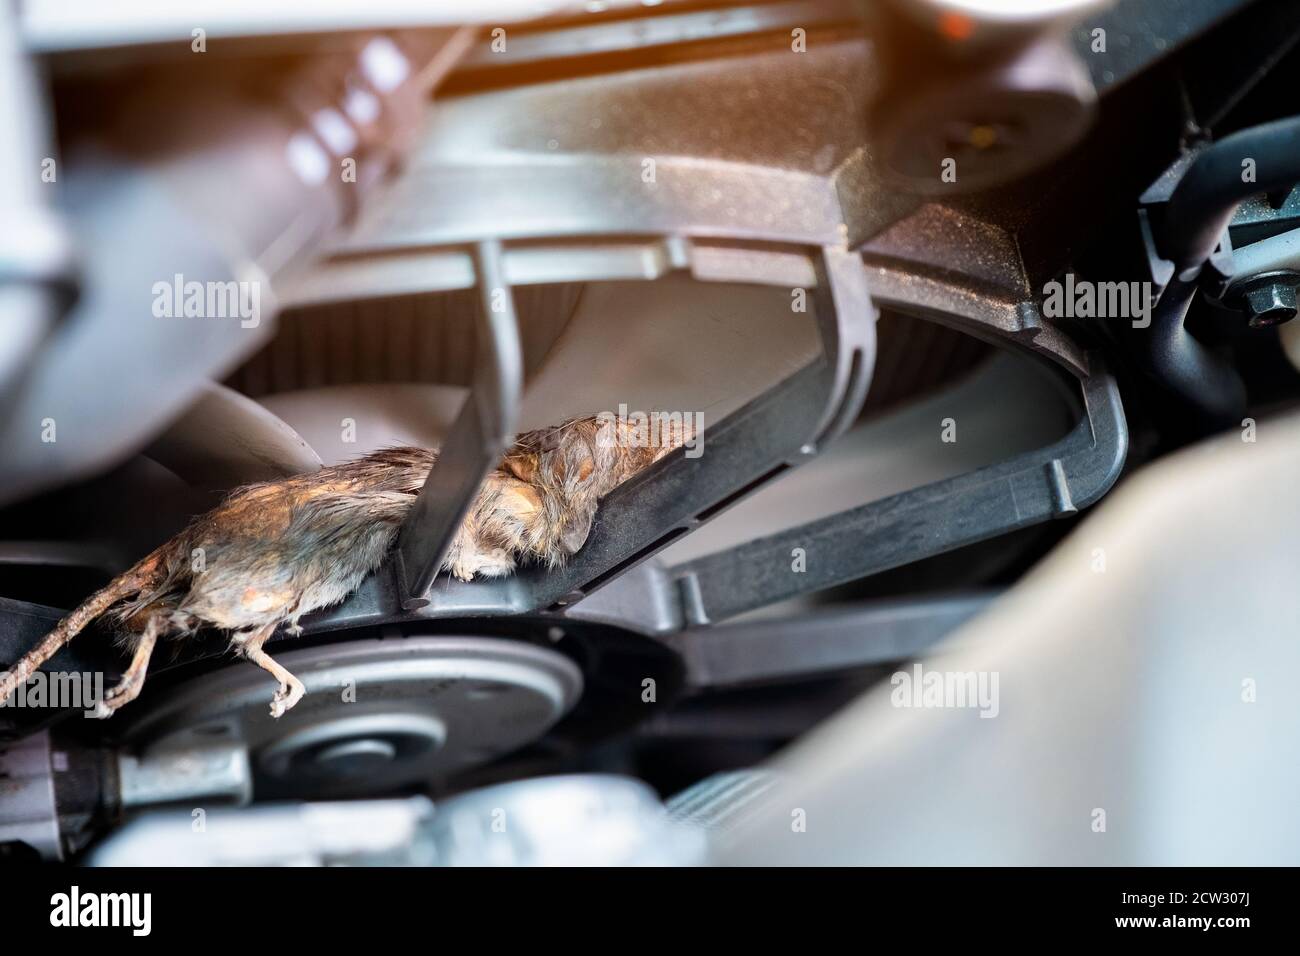 Auto mechanic clean dirty air fan form mouse.It try collect garbage to build rat's nest in car. technician repairs problem Stock Photo